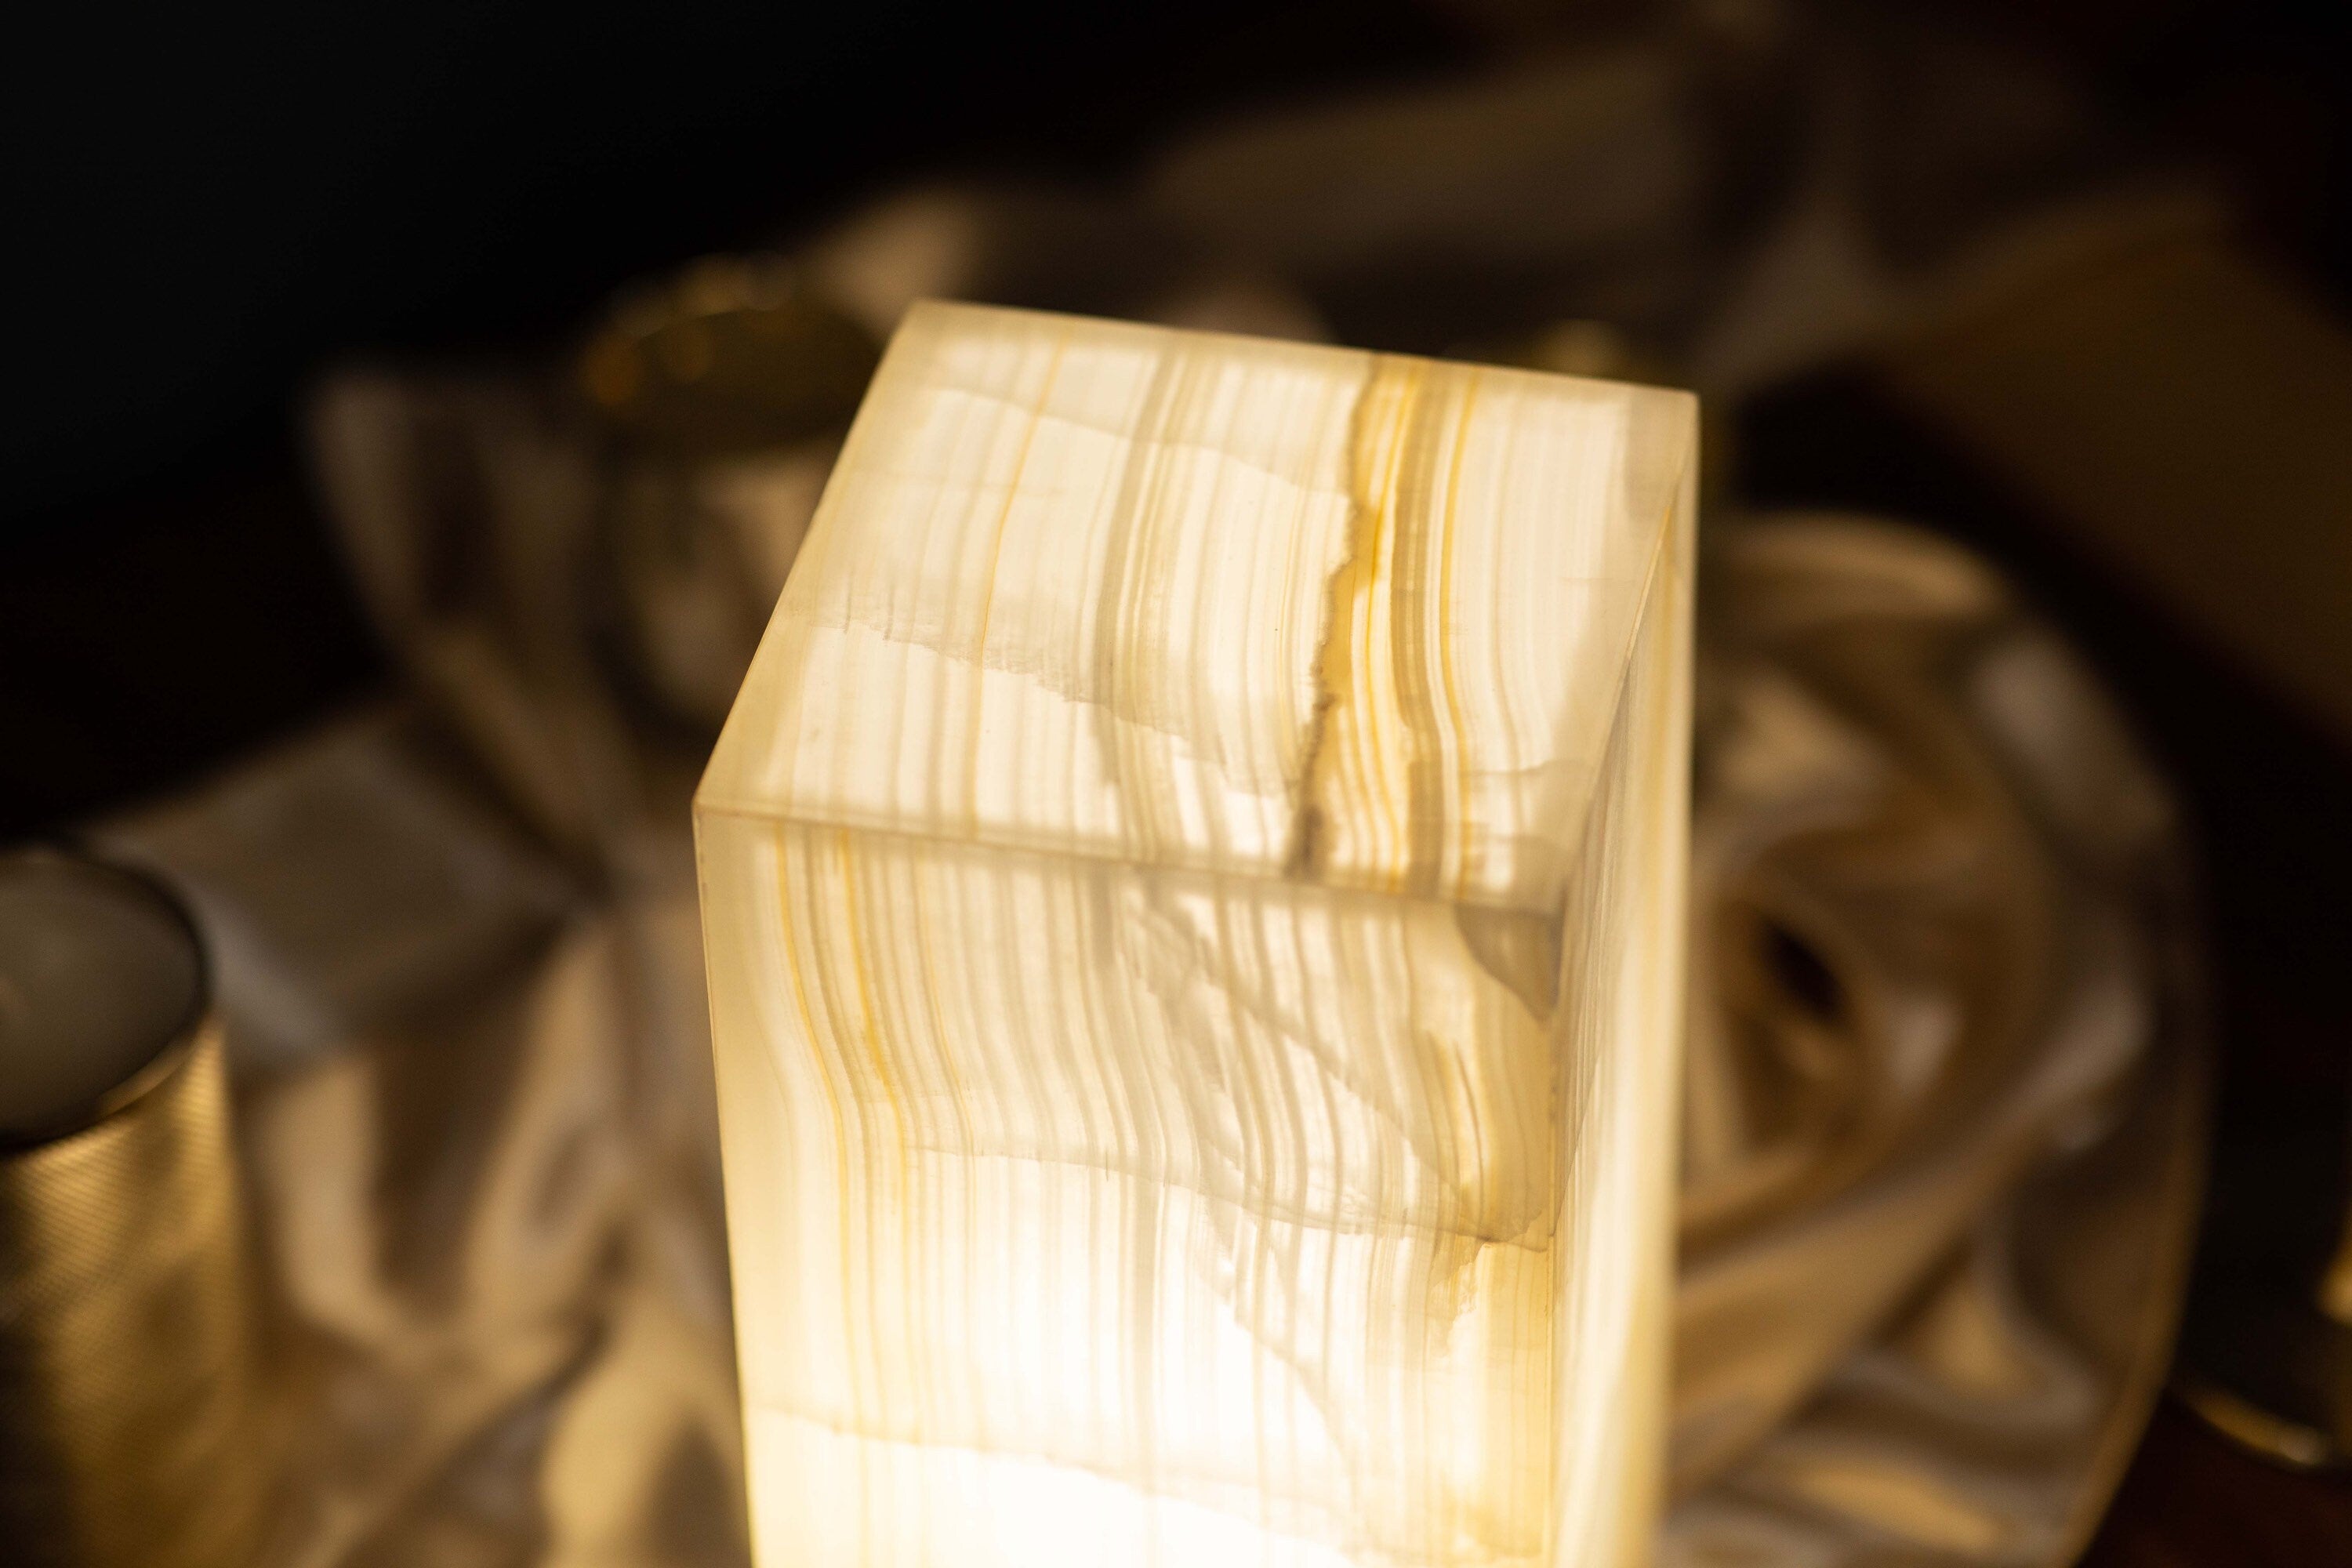 Clear & Beige - Onyx Lamp Collection - Home Decor - Decorative Lighting - 12 Inches